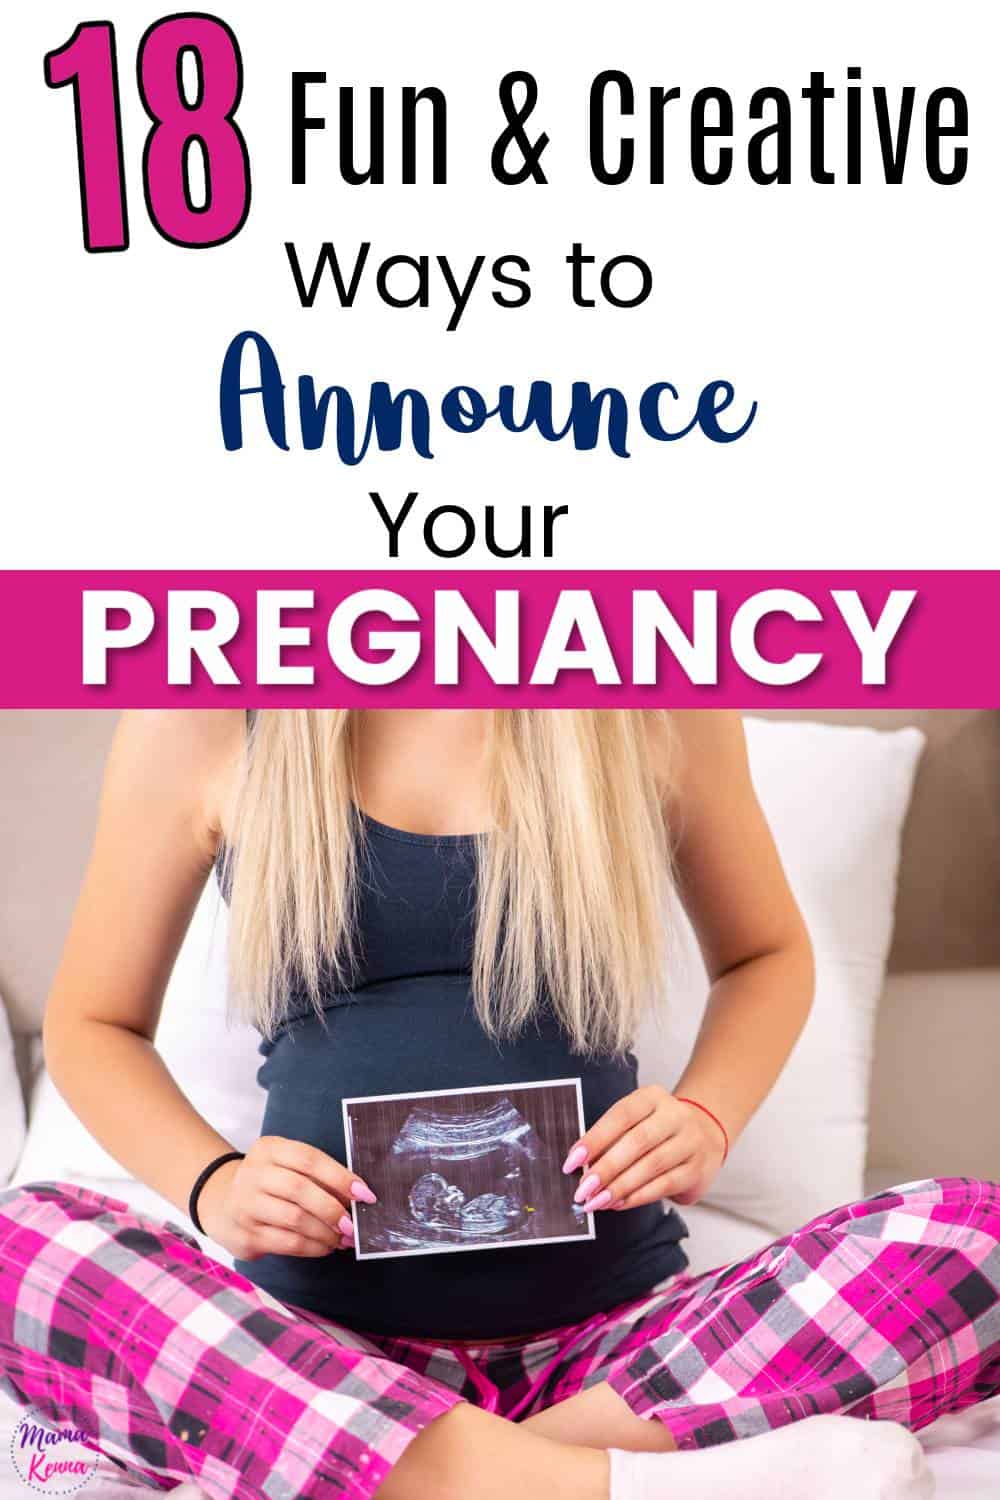 the best pregnancy announcement ideas that you can do for family, friends, and even your husband 